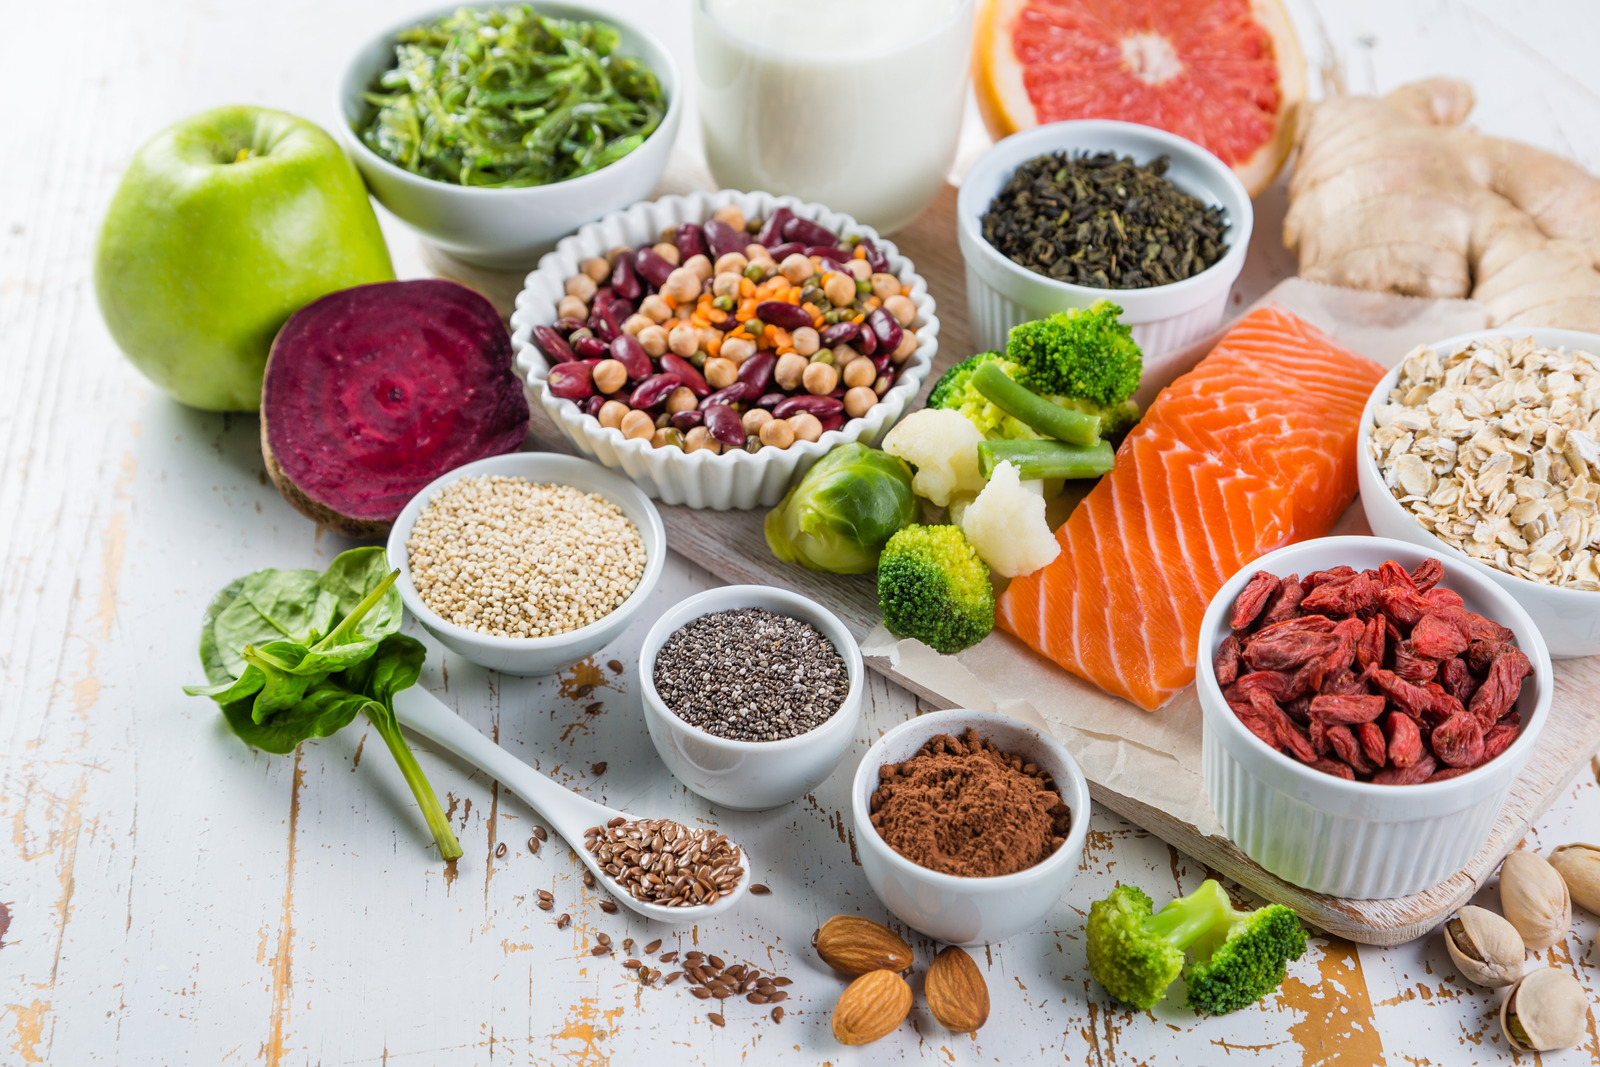 Selection of superfoods on rustic background, copy space